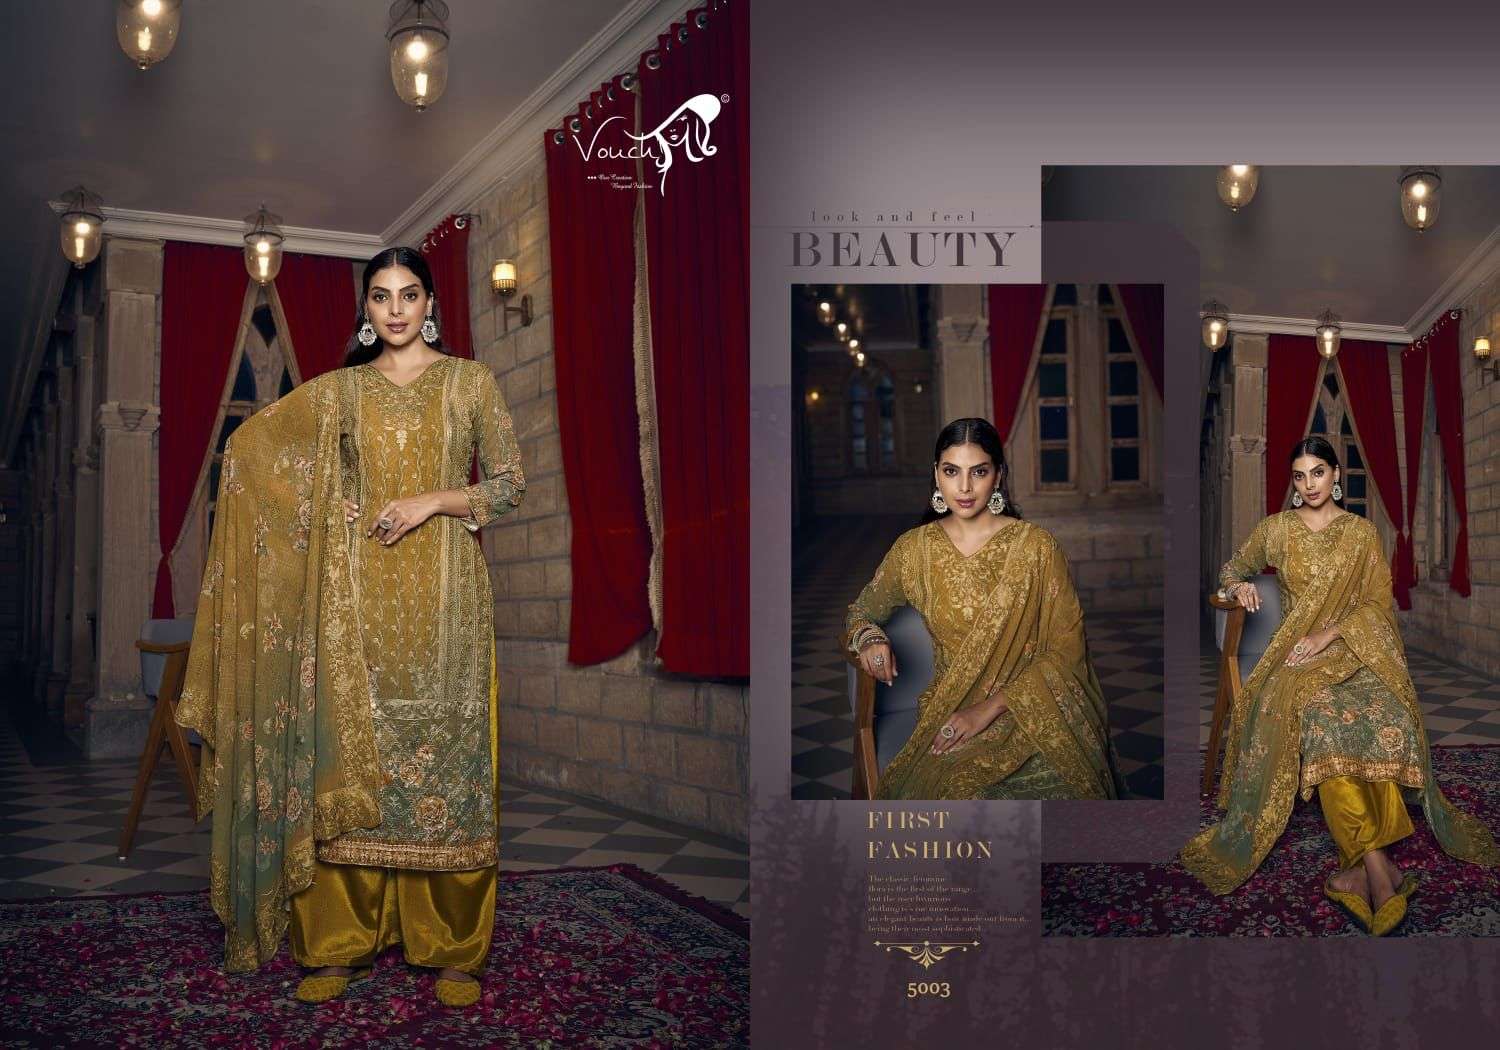 Gulistan By Vouche 5001 To 5006 Series Beautiful Suits Colorful Stylish Fancy Casual Wear Heavy Georgette Digital Print Dresses At Wholesale Price